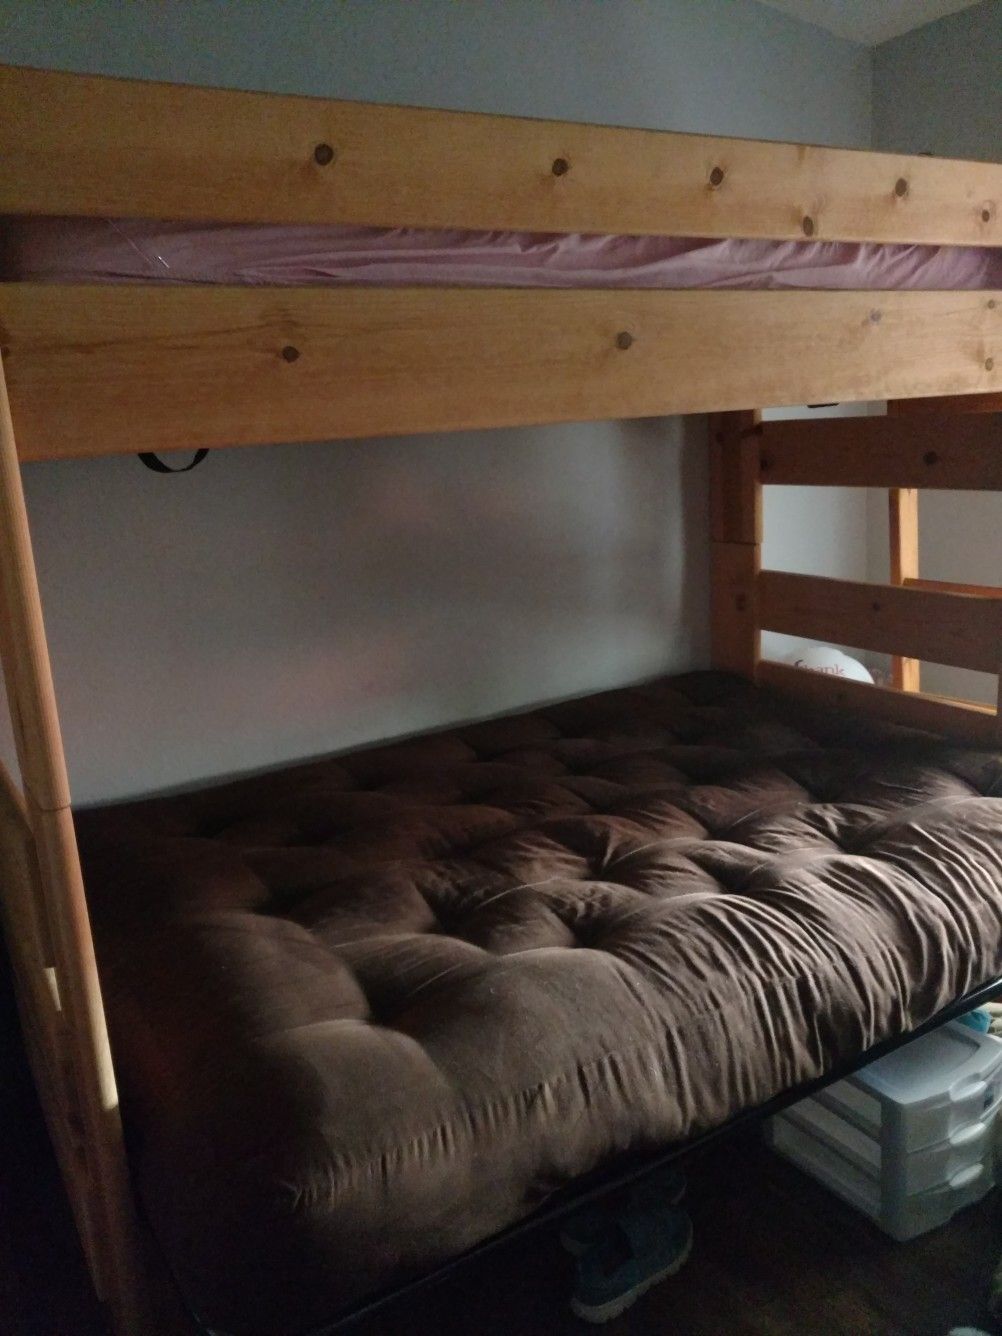 Bunk Bed twin/full drawers